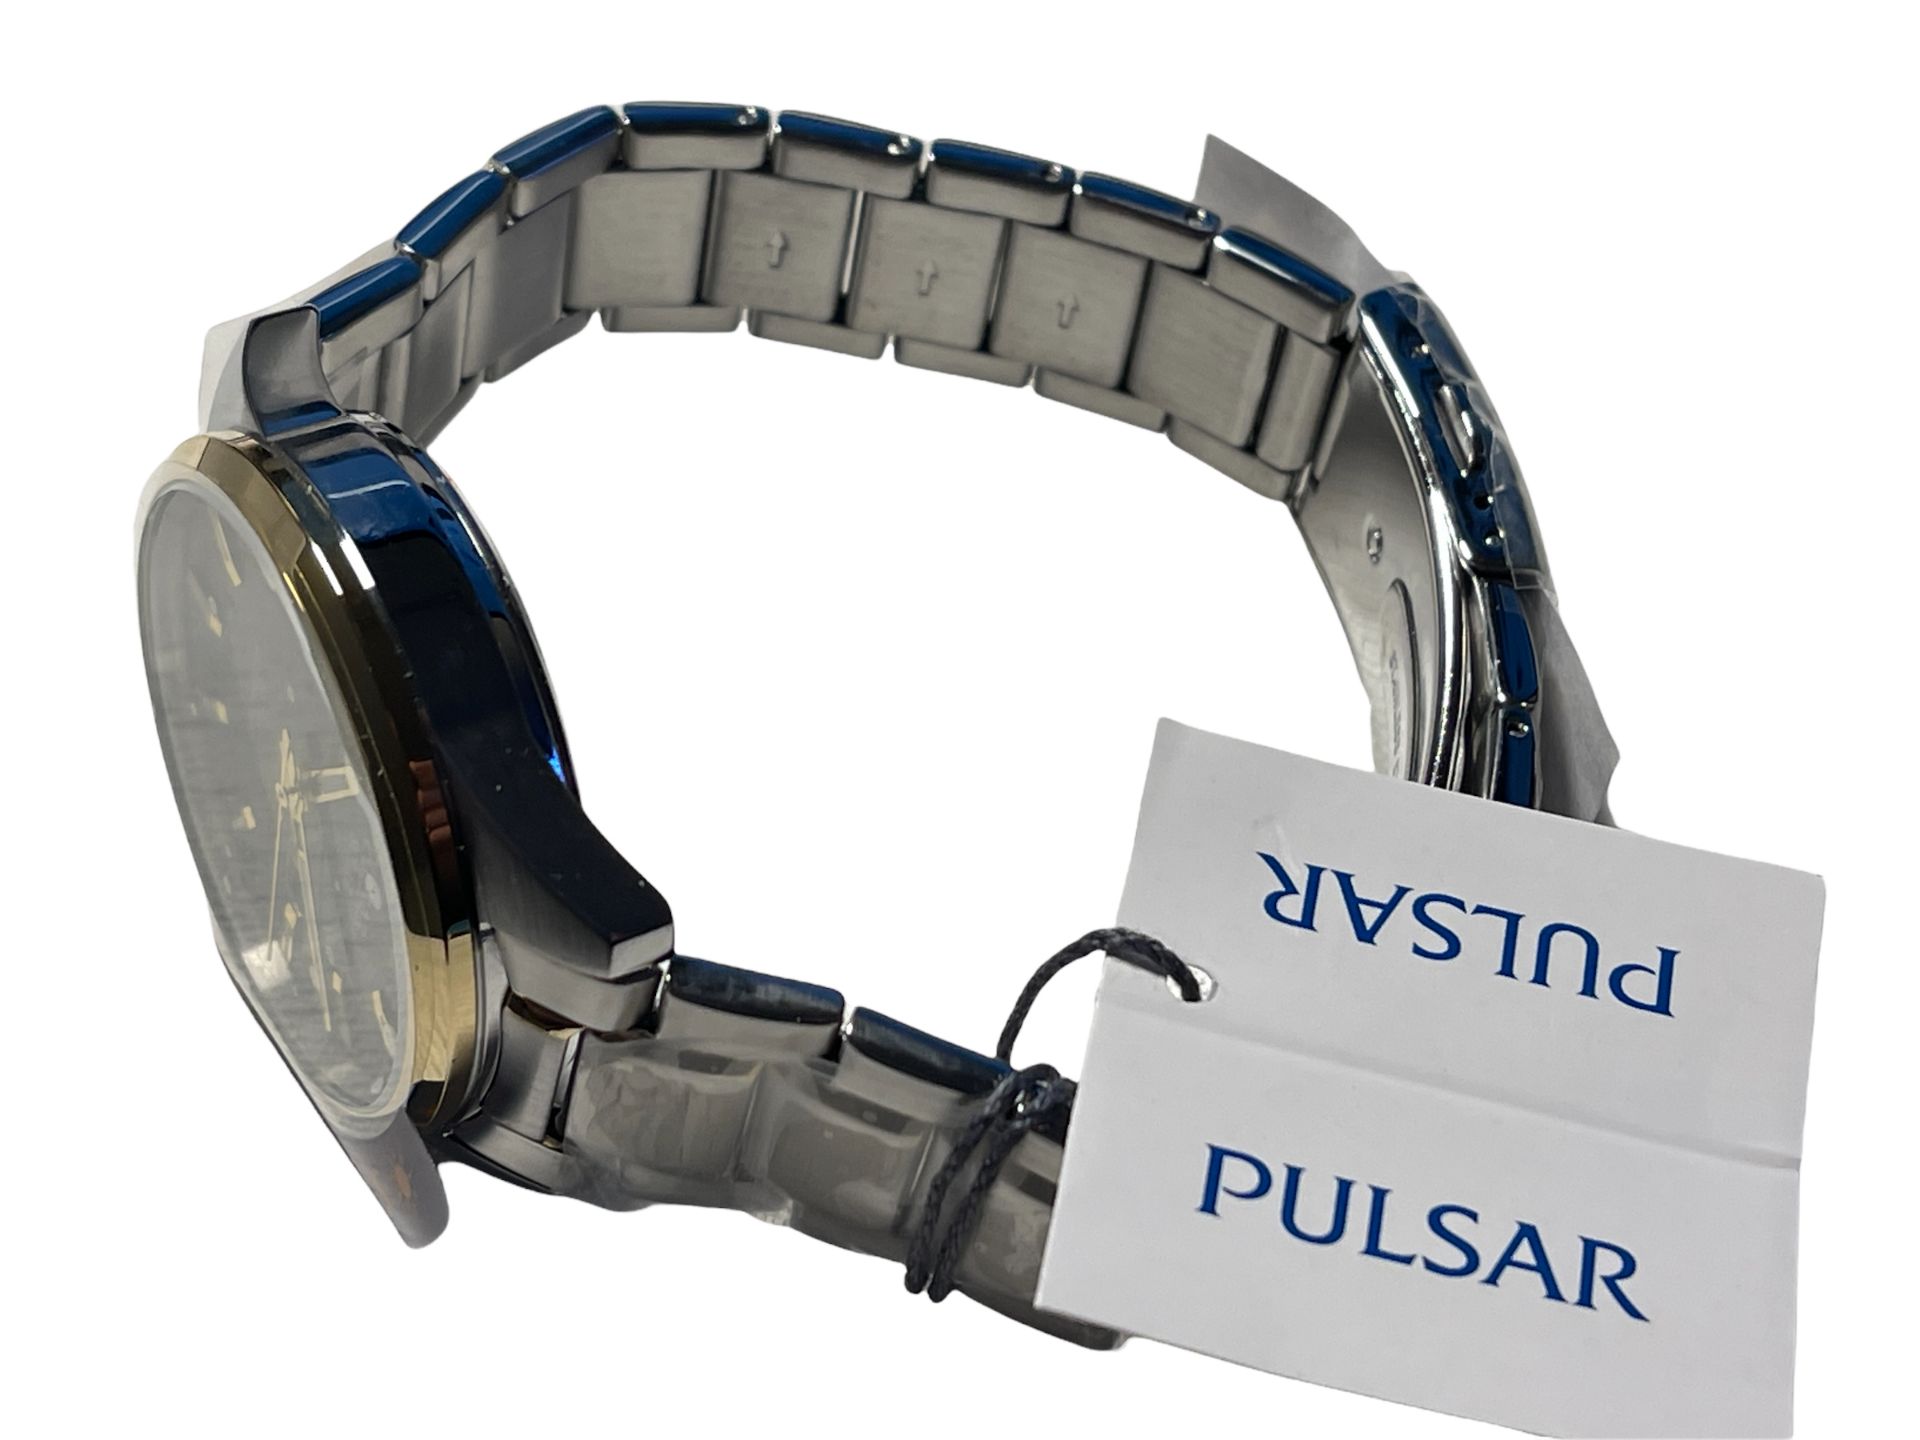 Pulsar Stainless Steel Men's Quartz Battery Watch - Surplus Stock/Ex Demo from Private Jet Charter.. - Image 3 of 4